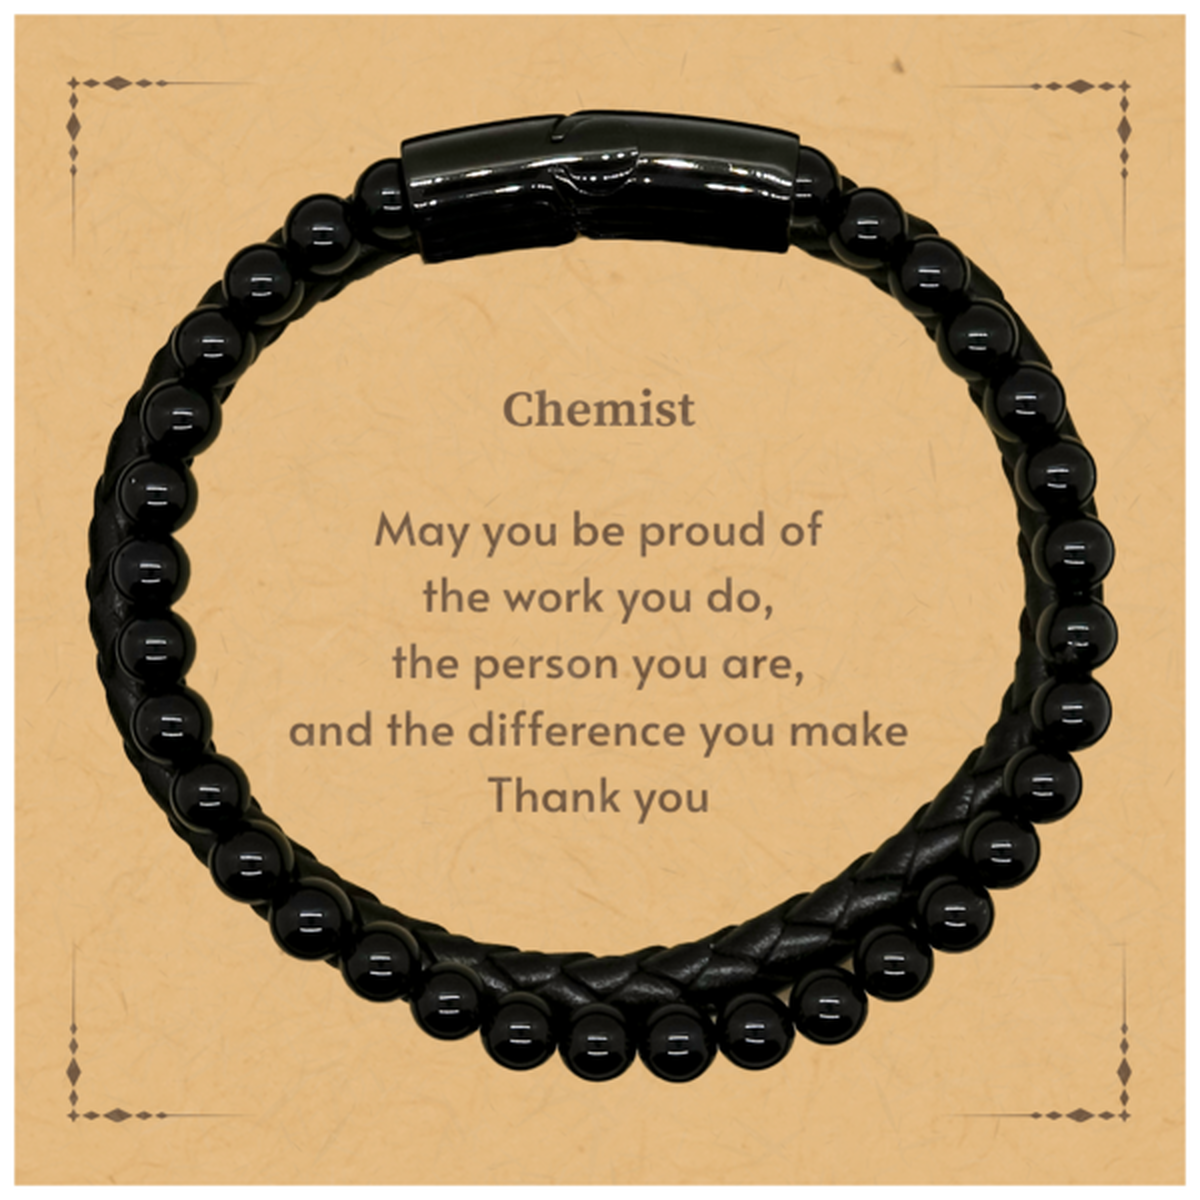 Heartwarming Stone Leather Bracelets Retirement Coworkers Gifts for Chemist, Chemist May You be proud of the work you do, the person you are Gifts for Boss Men Women Friends